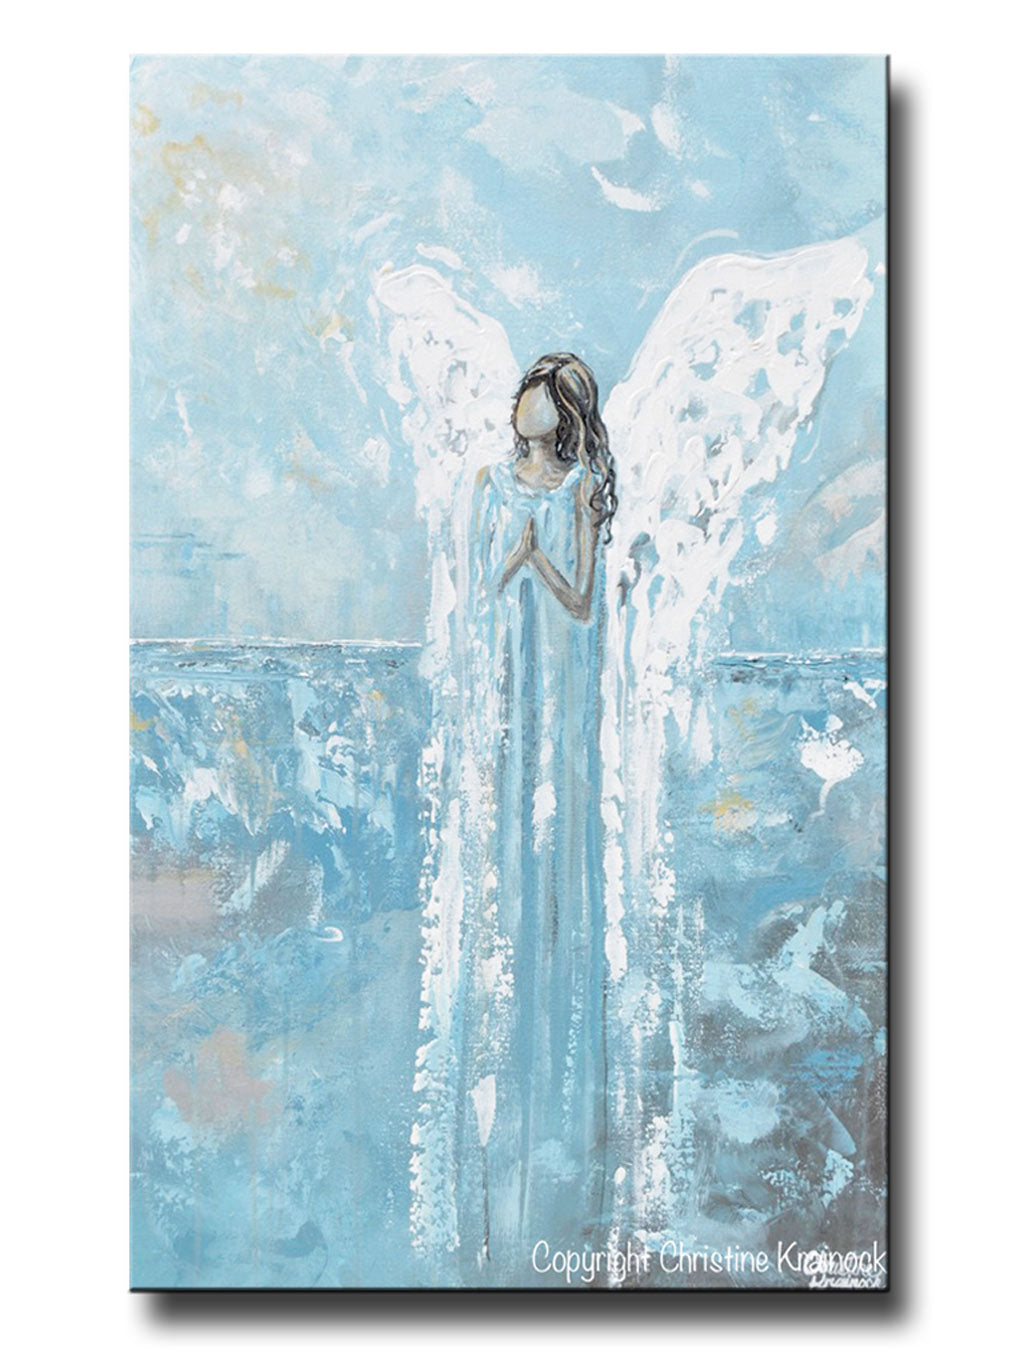 GICLEE PRINT Abstract Angel Painting Blue White Guardian Angel Home Decor Wall Art